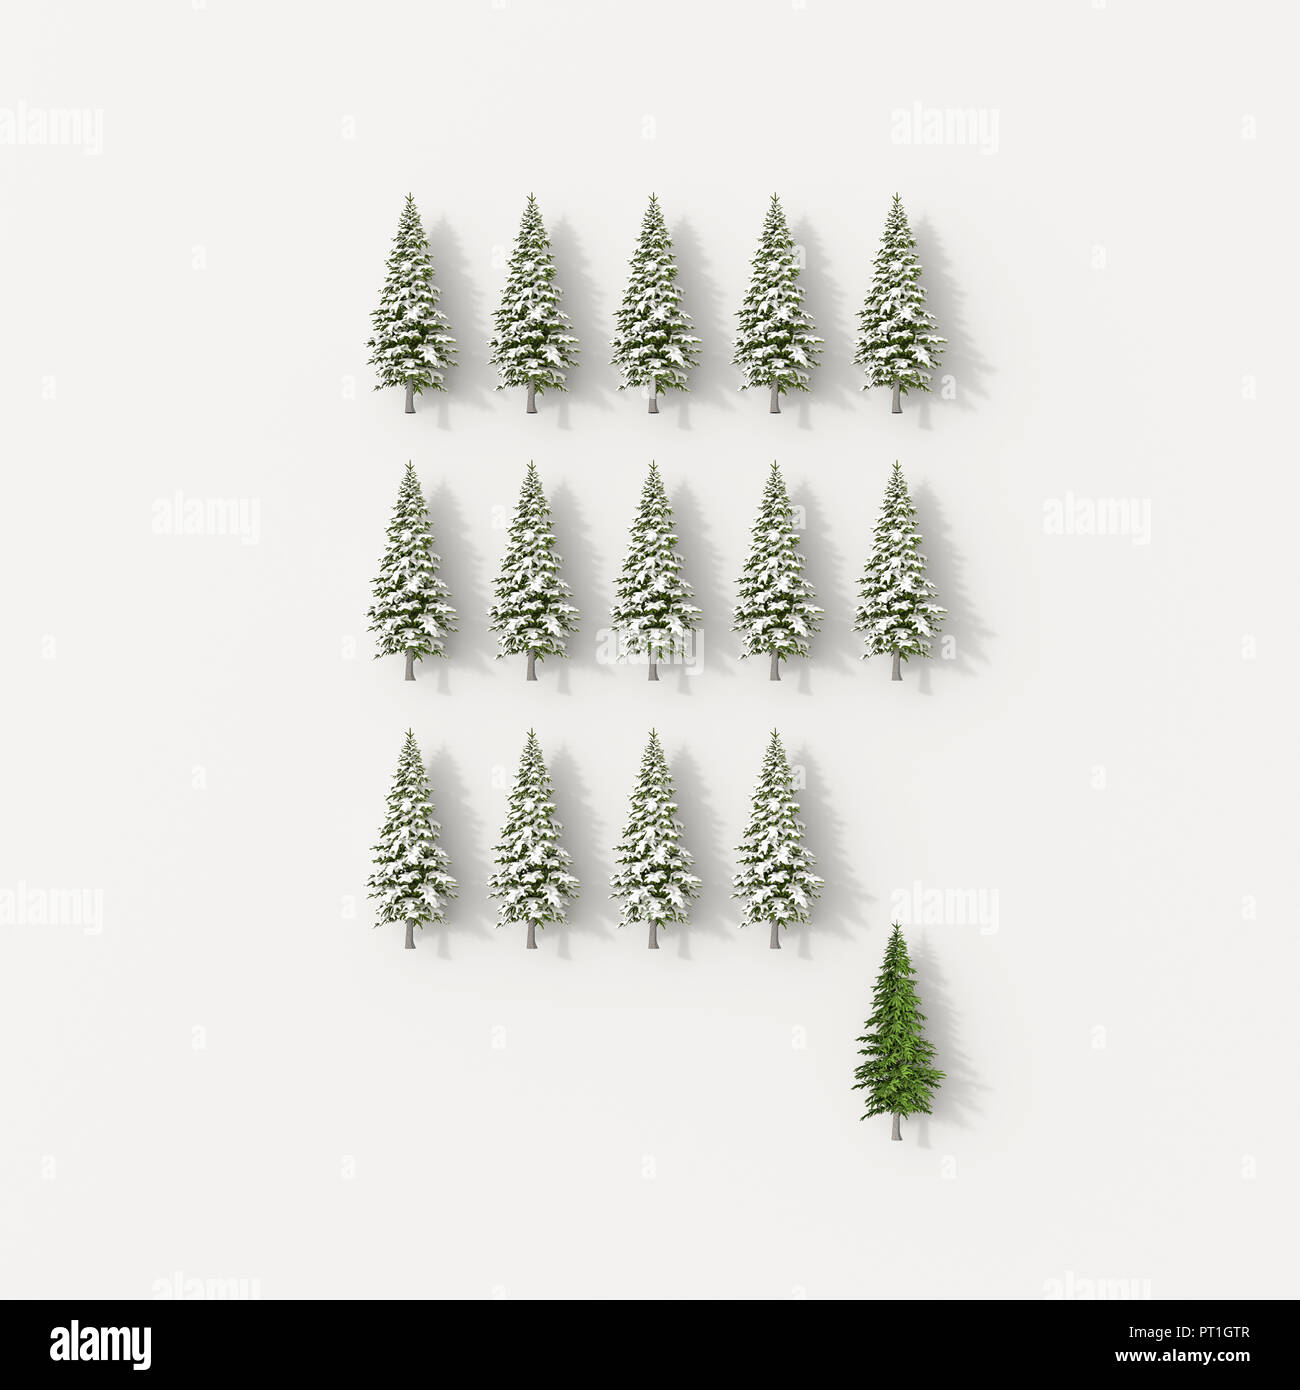 3D rendering, Rows of fir trees on white background, with one green one, standing out Stock Photo